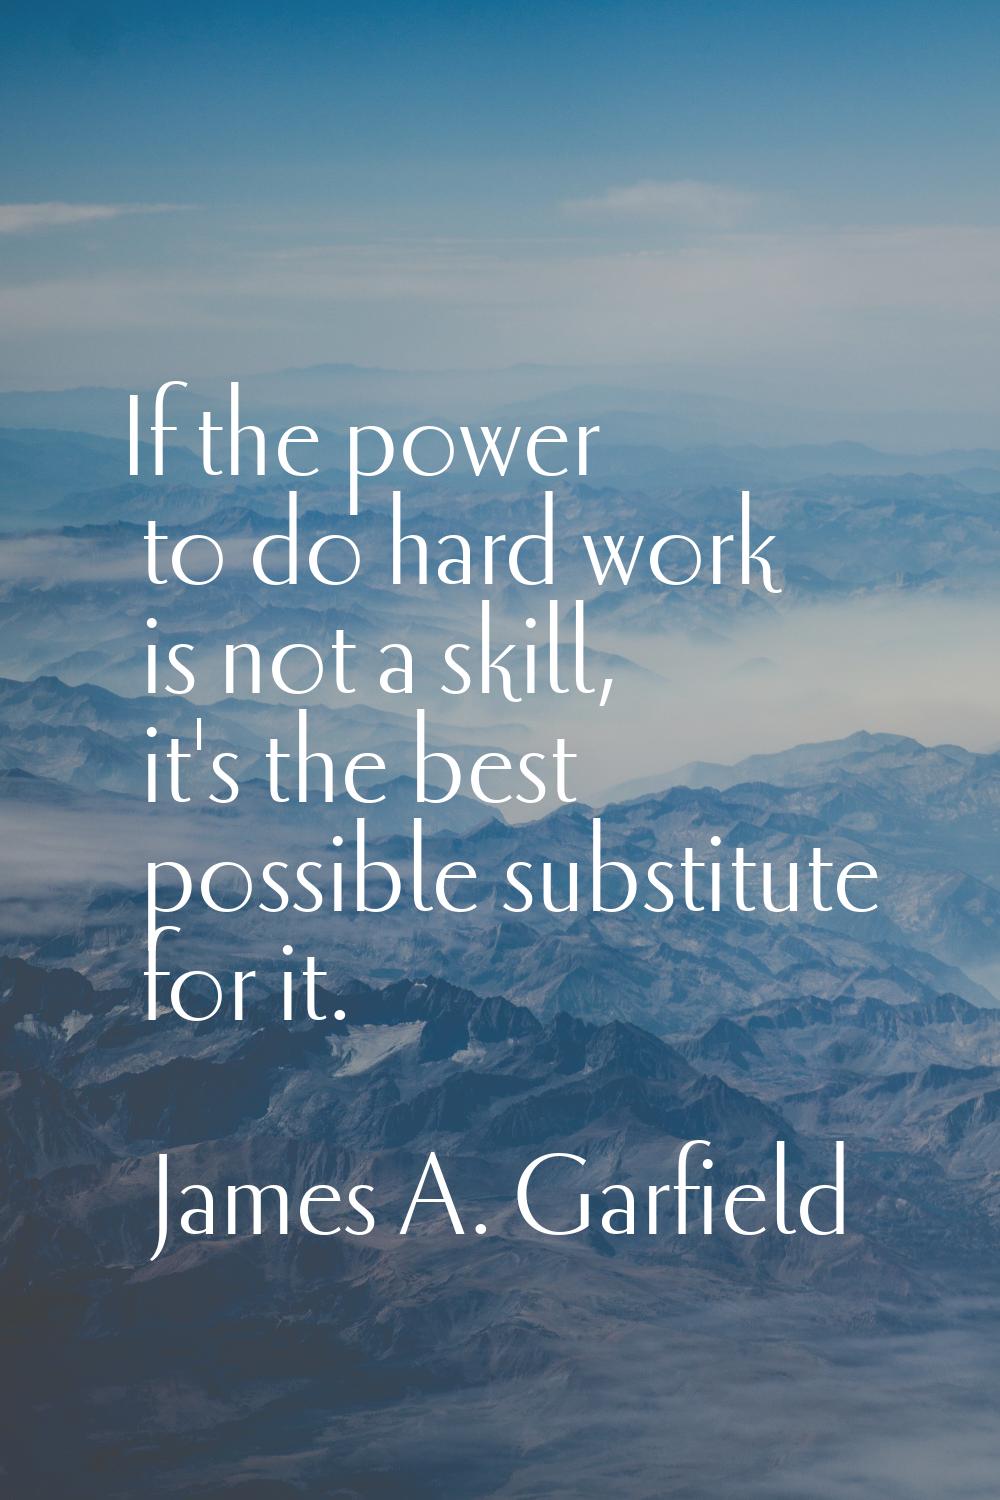 If the power to do hard work is not a skill, it's the best possible substitute for it.